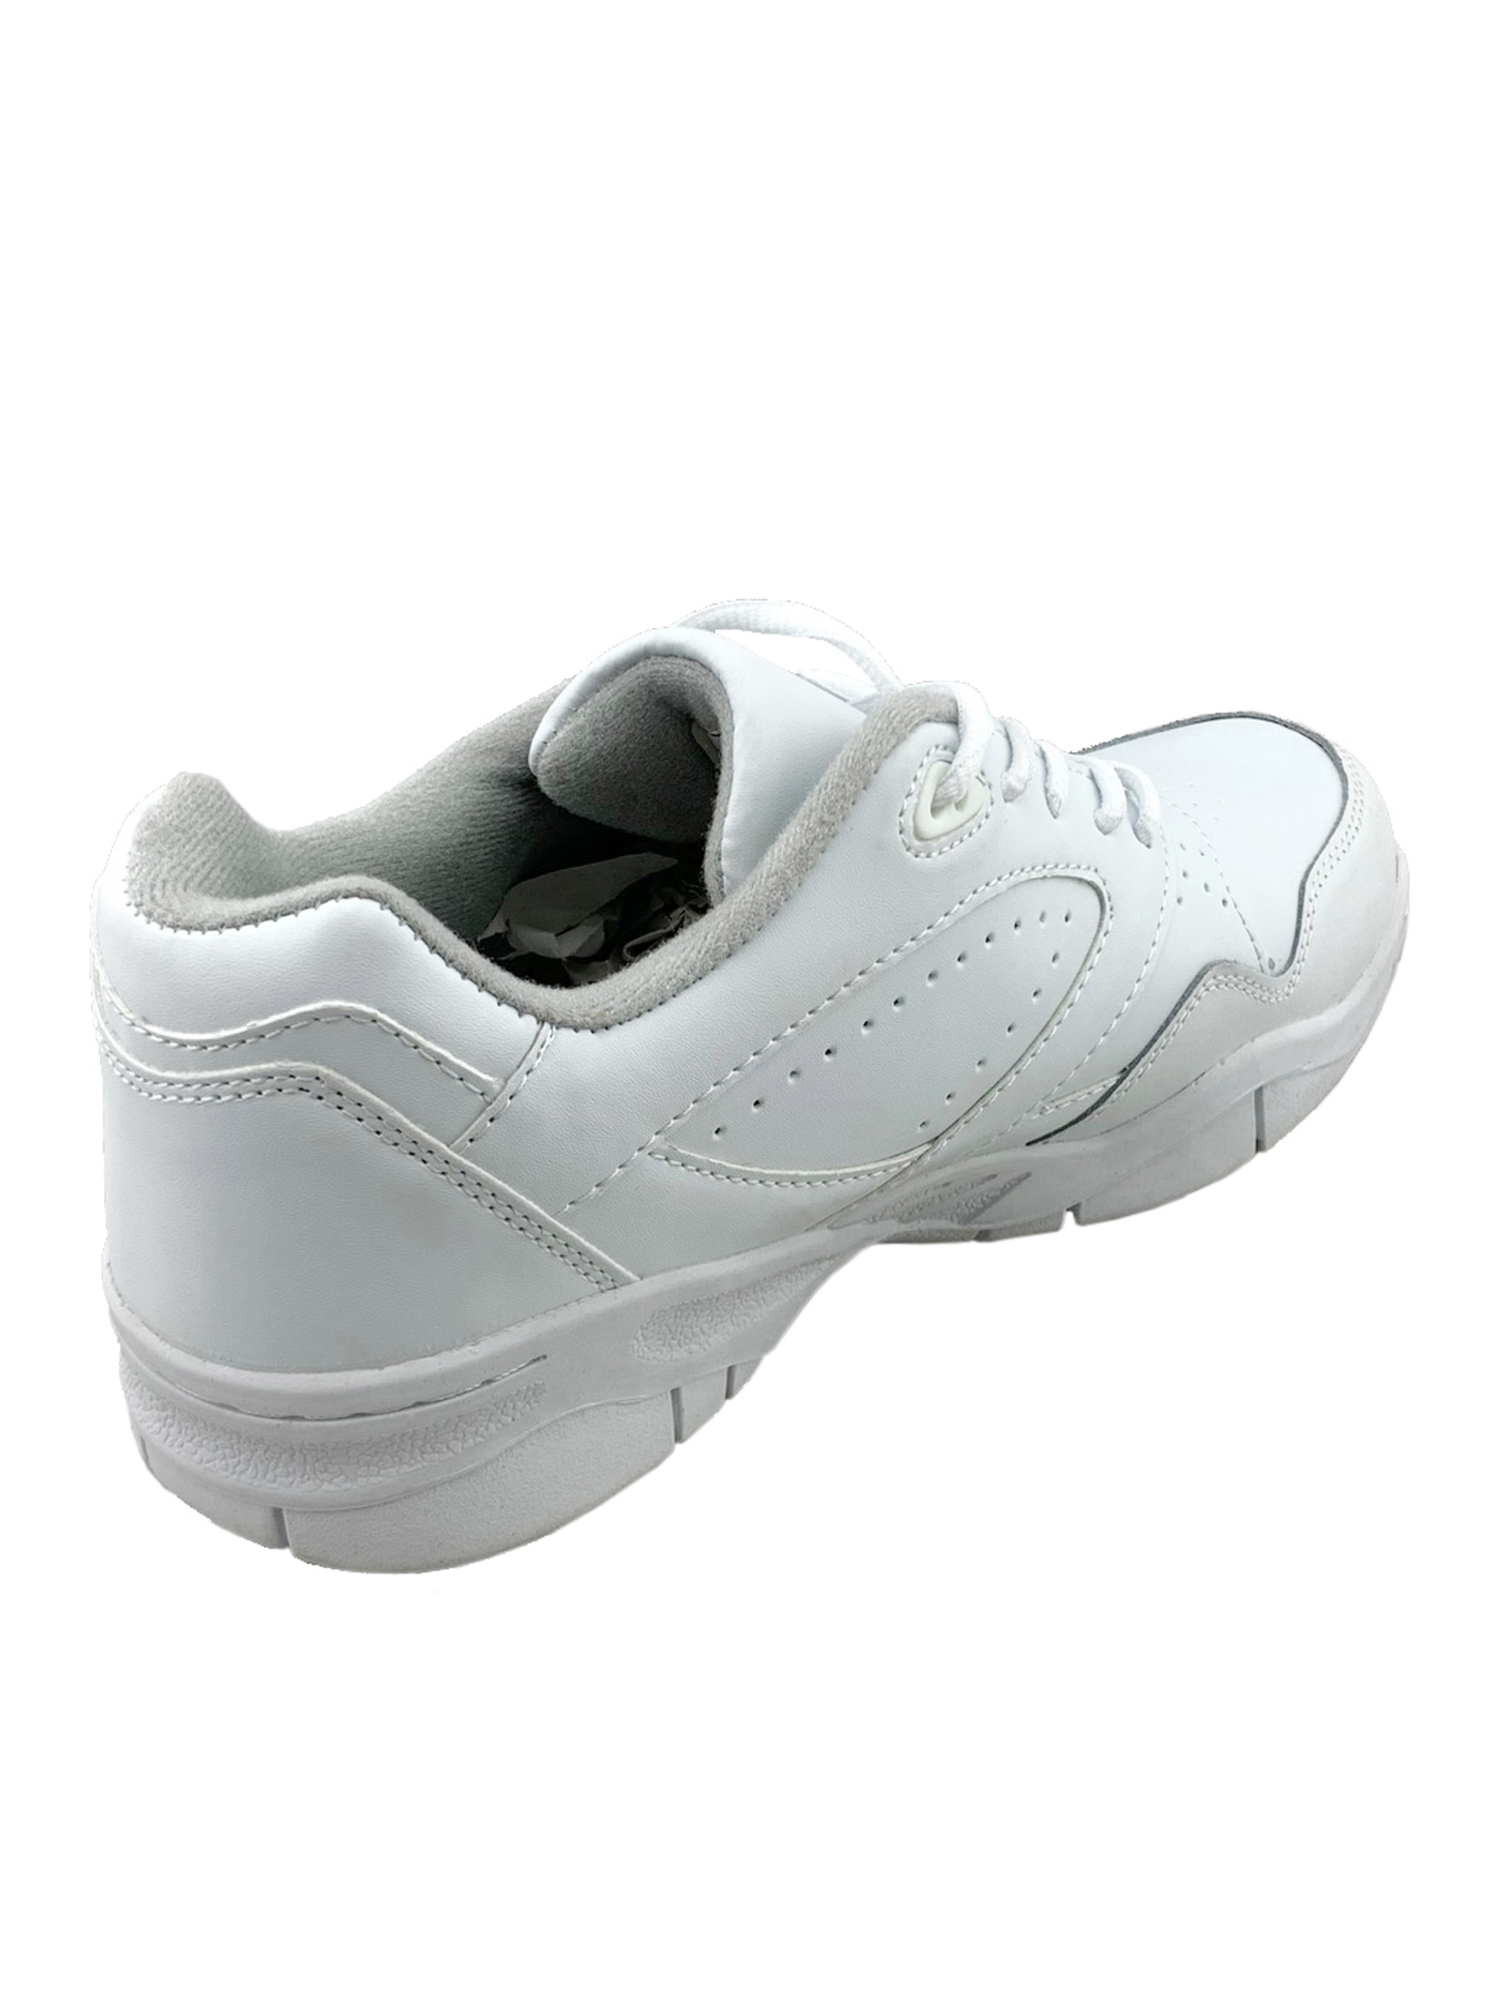 Tanleewa Men's Leather White Sports Shoes Lightweight Sneakers Breathable Casual Shoe Size 13 - image 5 of 5